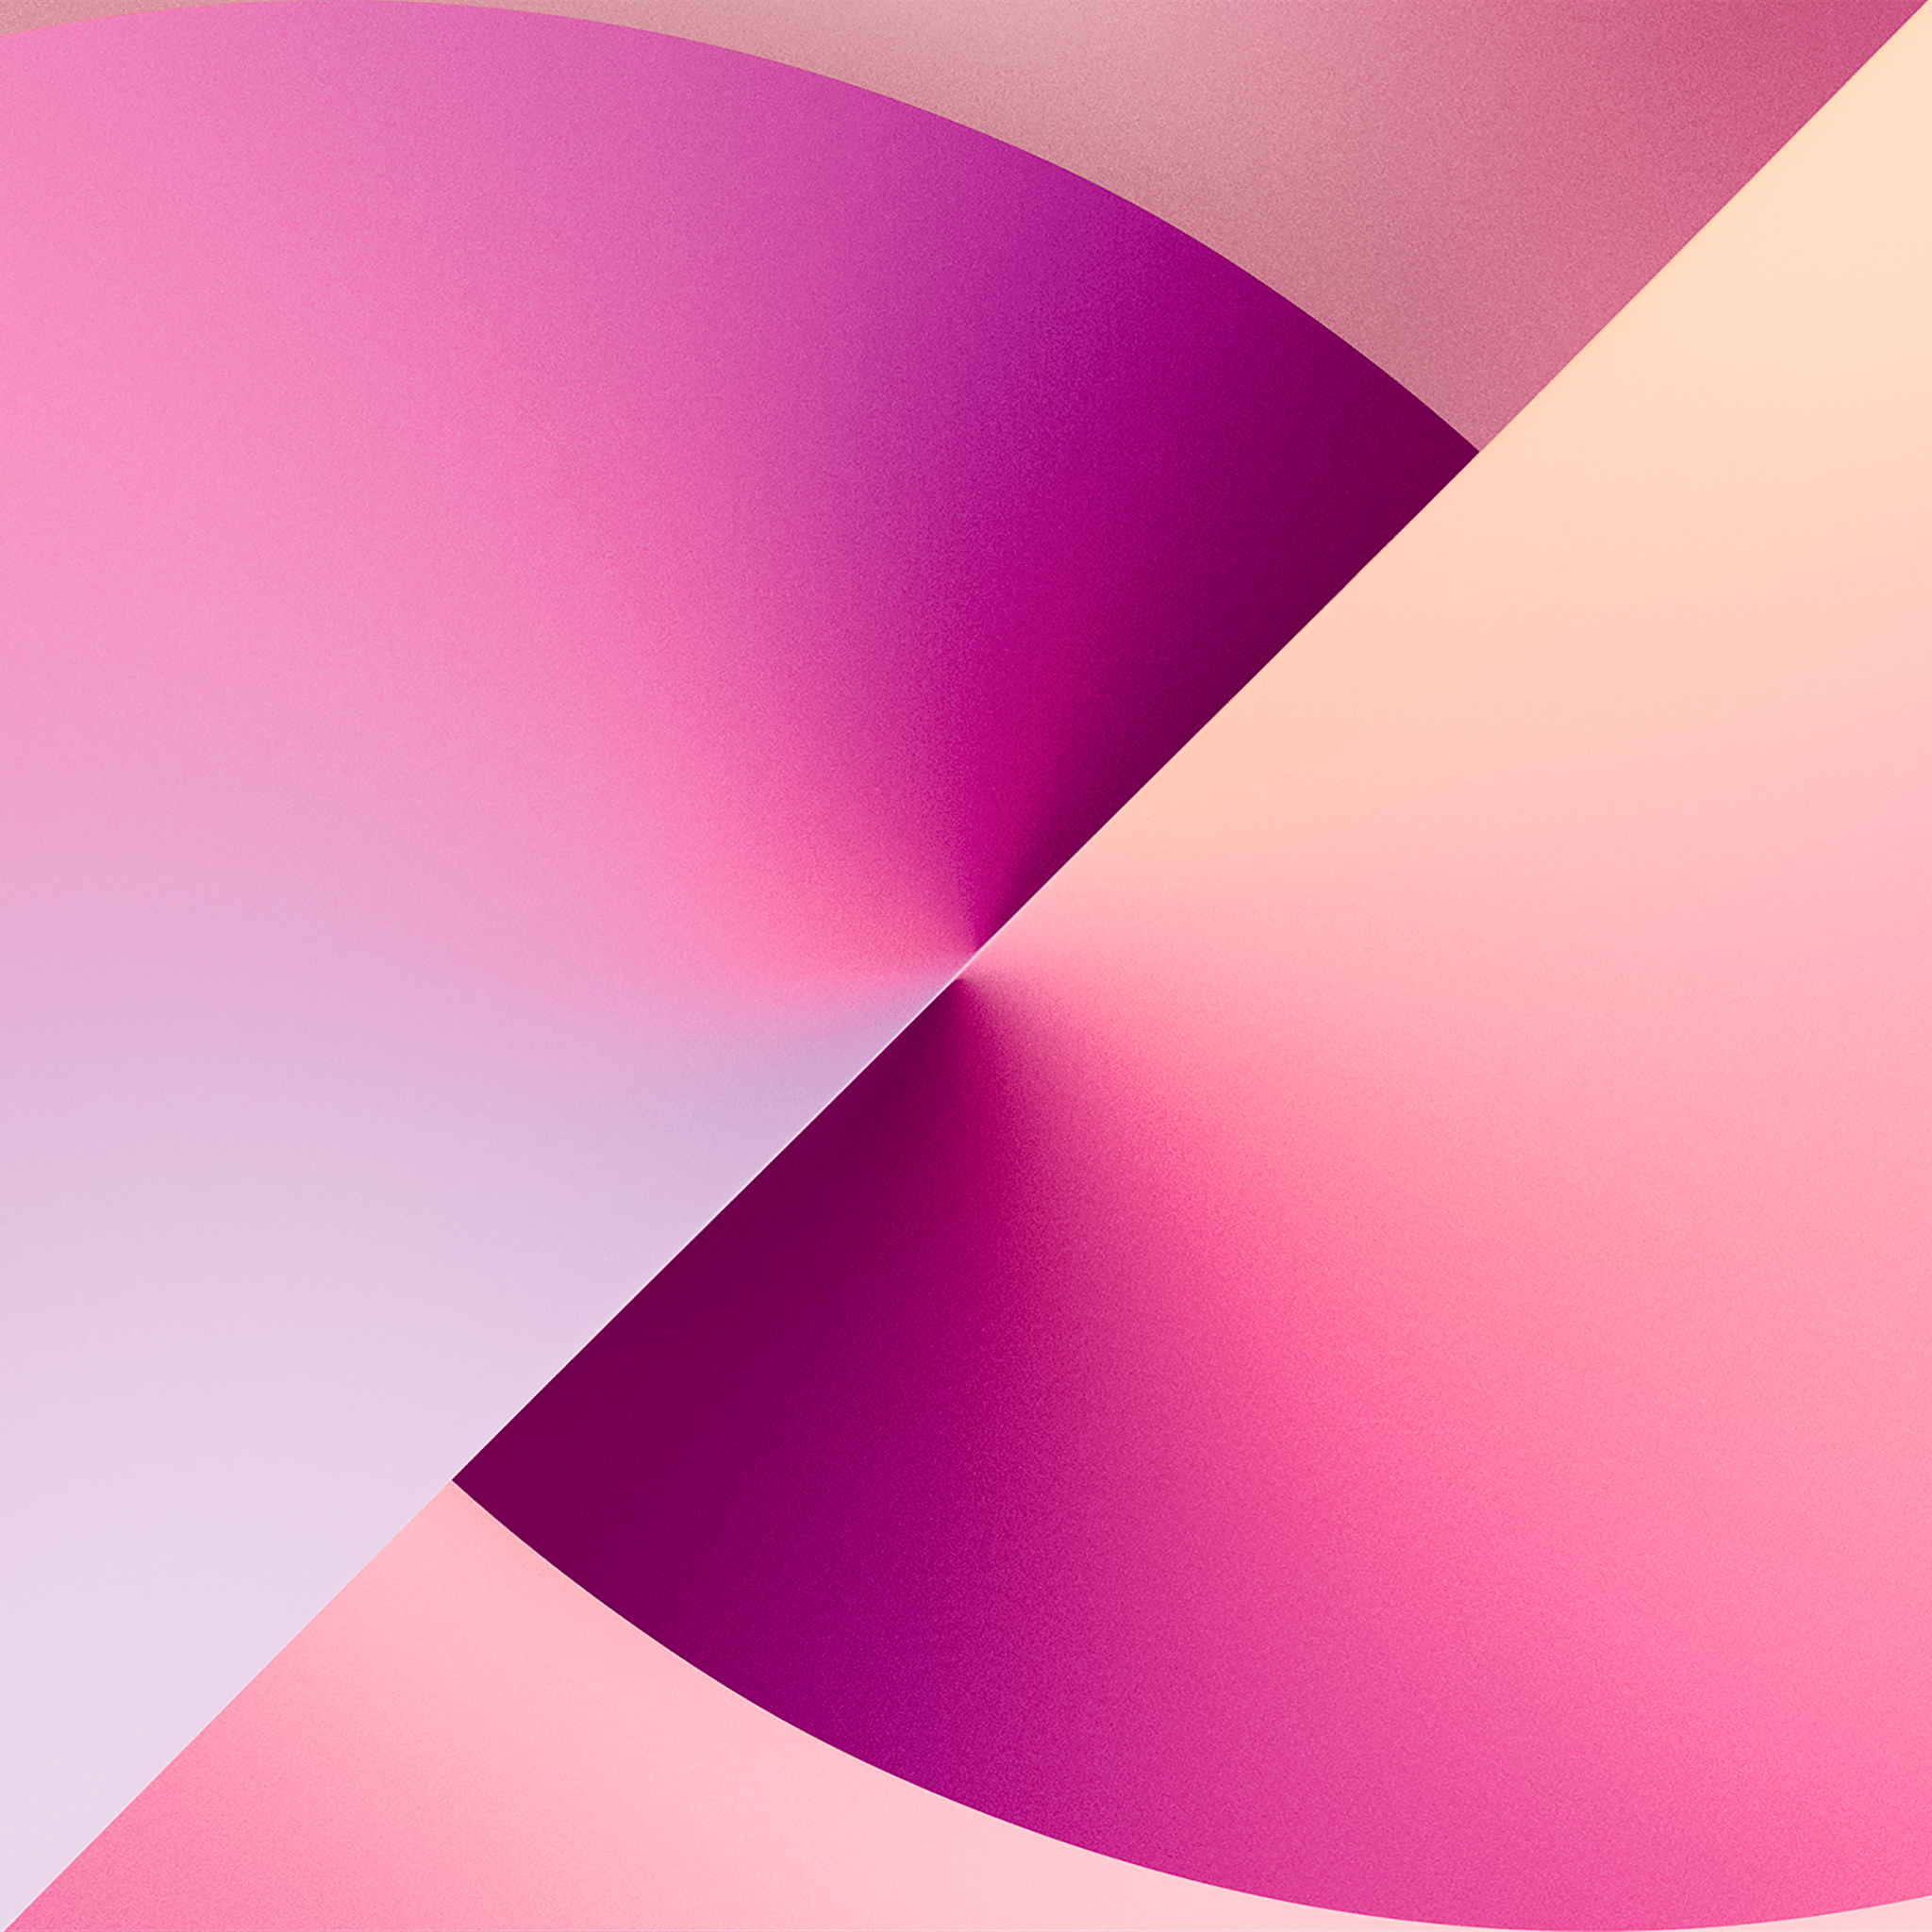 A pink and purple abstract image with a Z shape - Pink